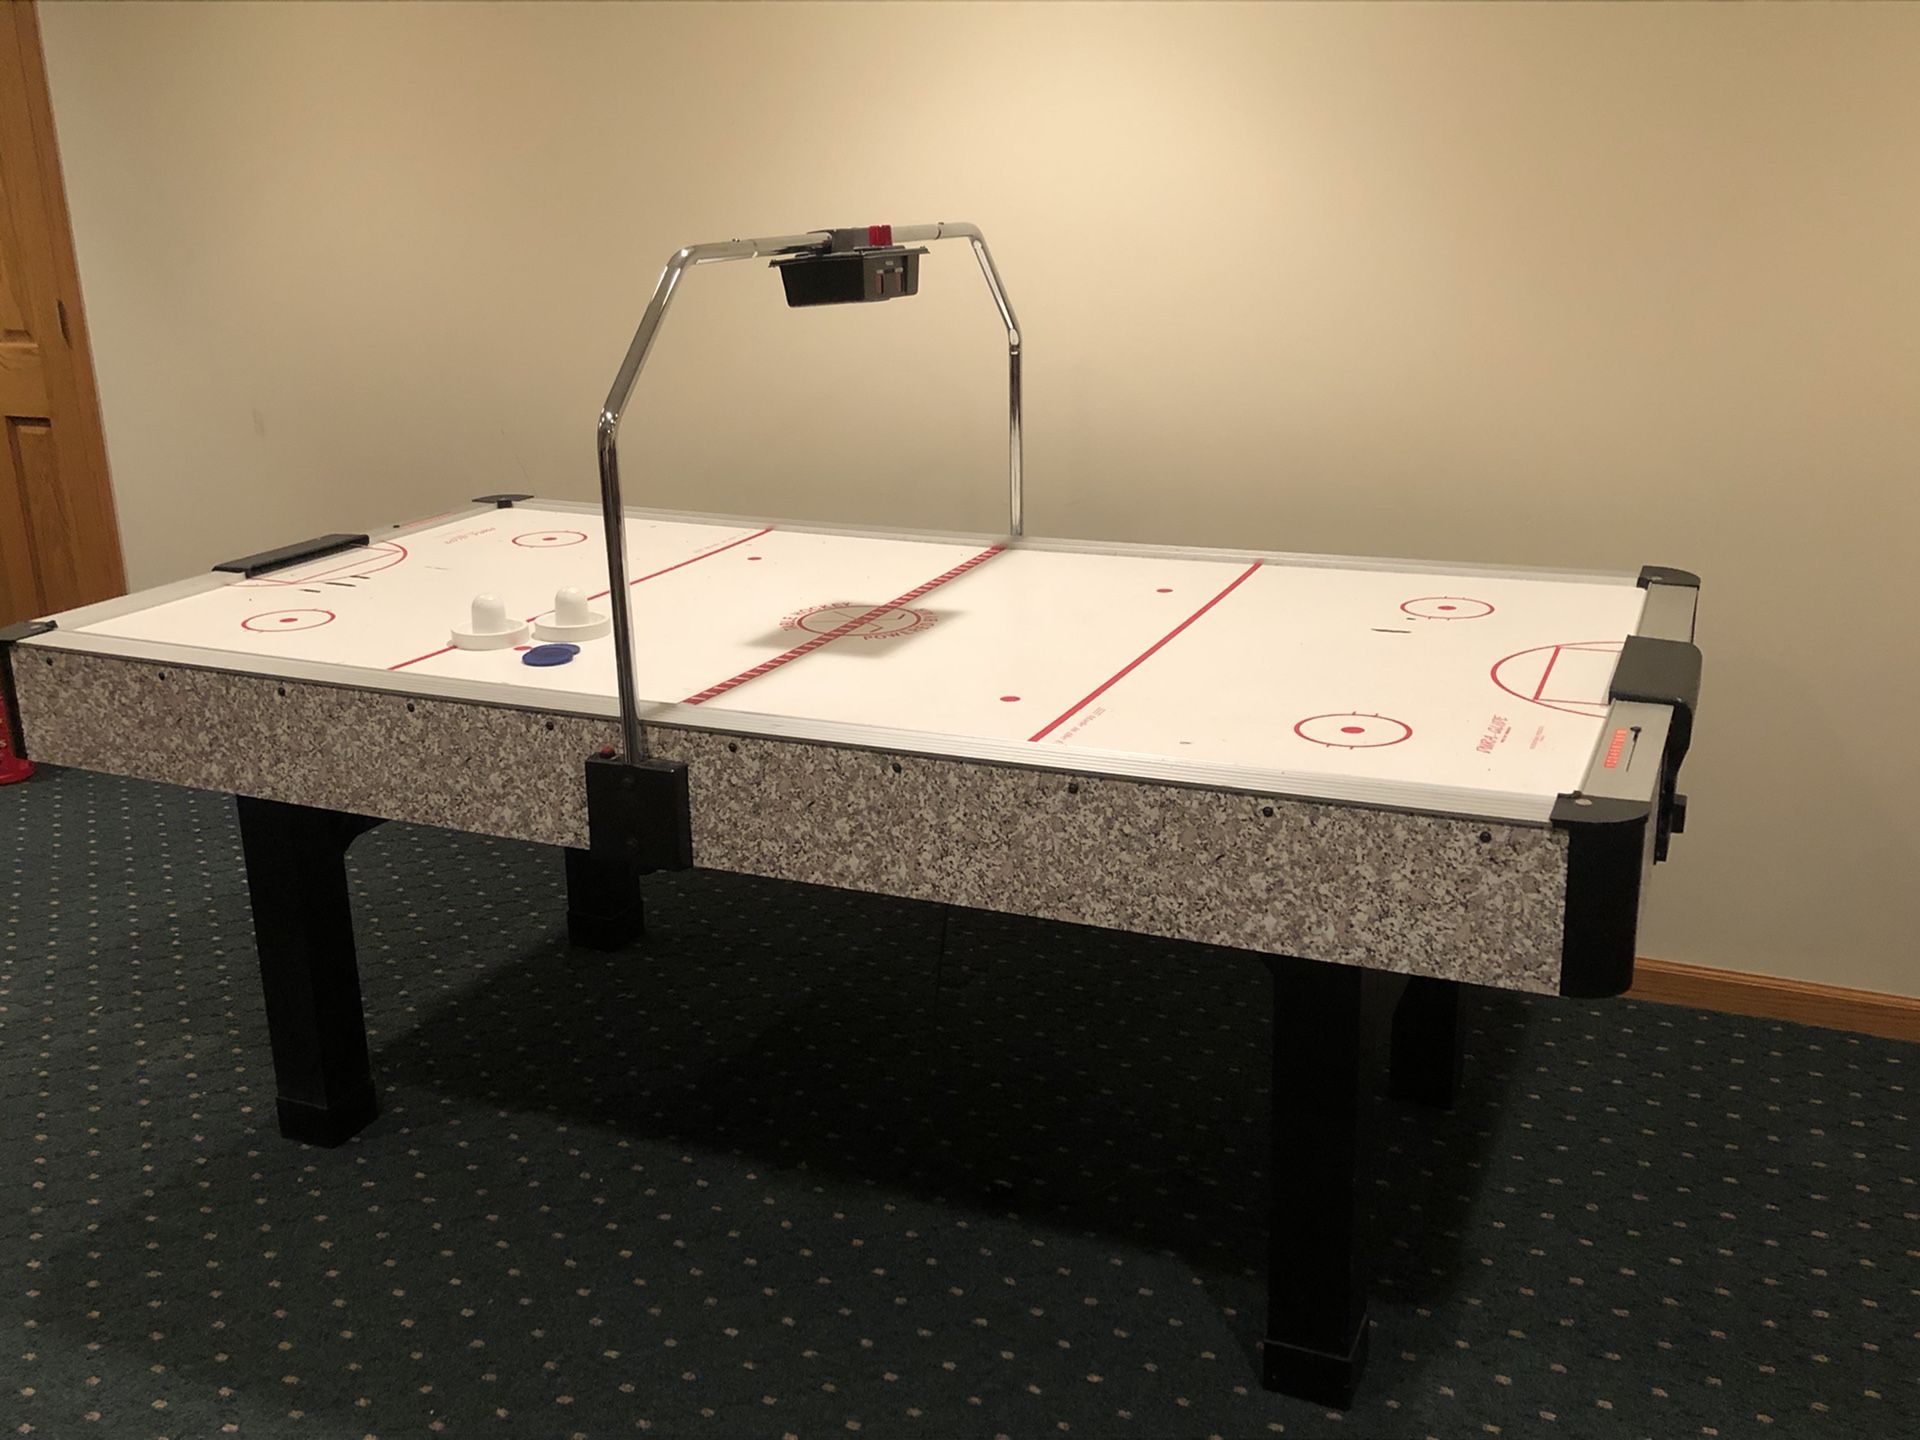 Dura Glide 7’ Air Hockey Table with electronic scoreboard